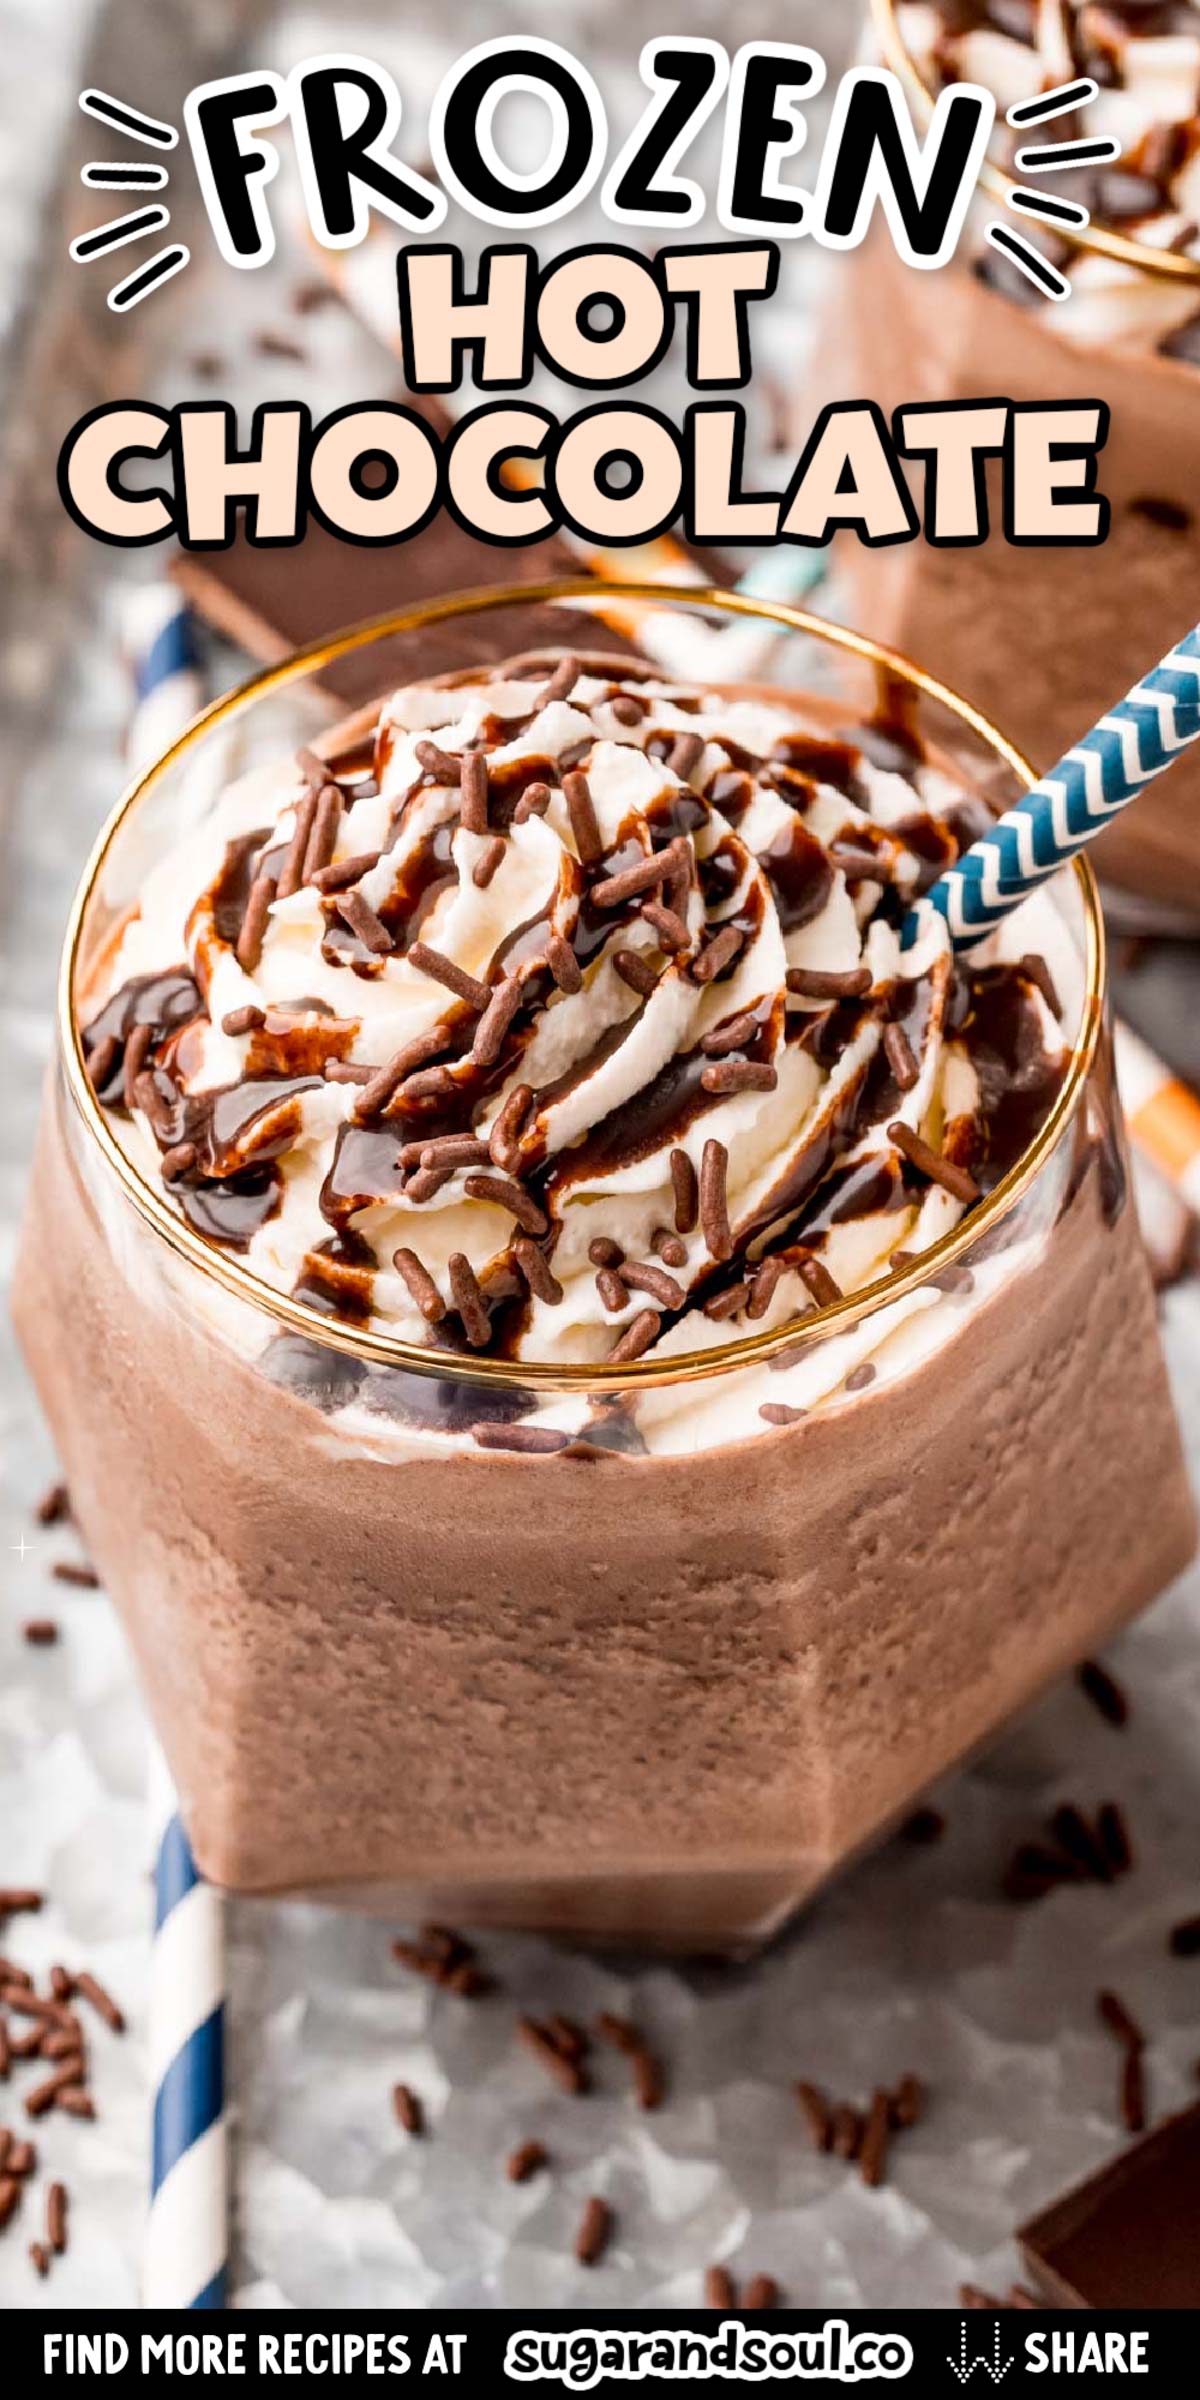 Frozen Hot Chocolate is loaded with the rich chocolaty flavor you love about hot cocoa but in frozen form making it the perfect Summer treat! This quickly comes together in just 5 minutes using only 5 ingredients! via @sugarandsoulco